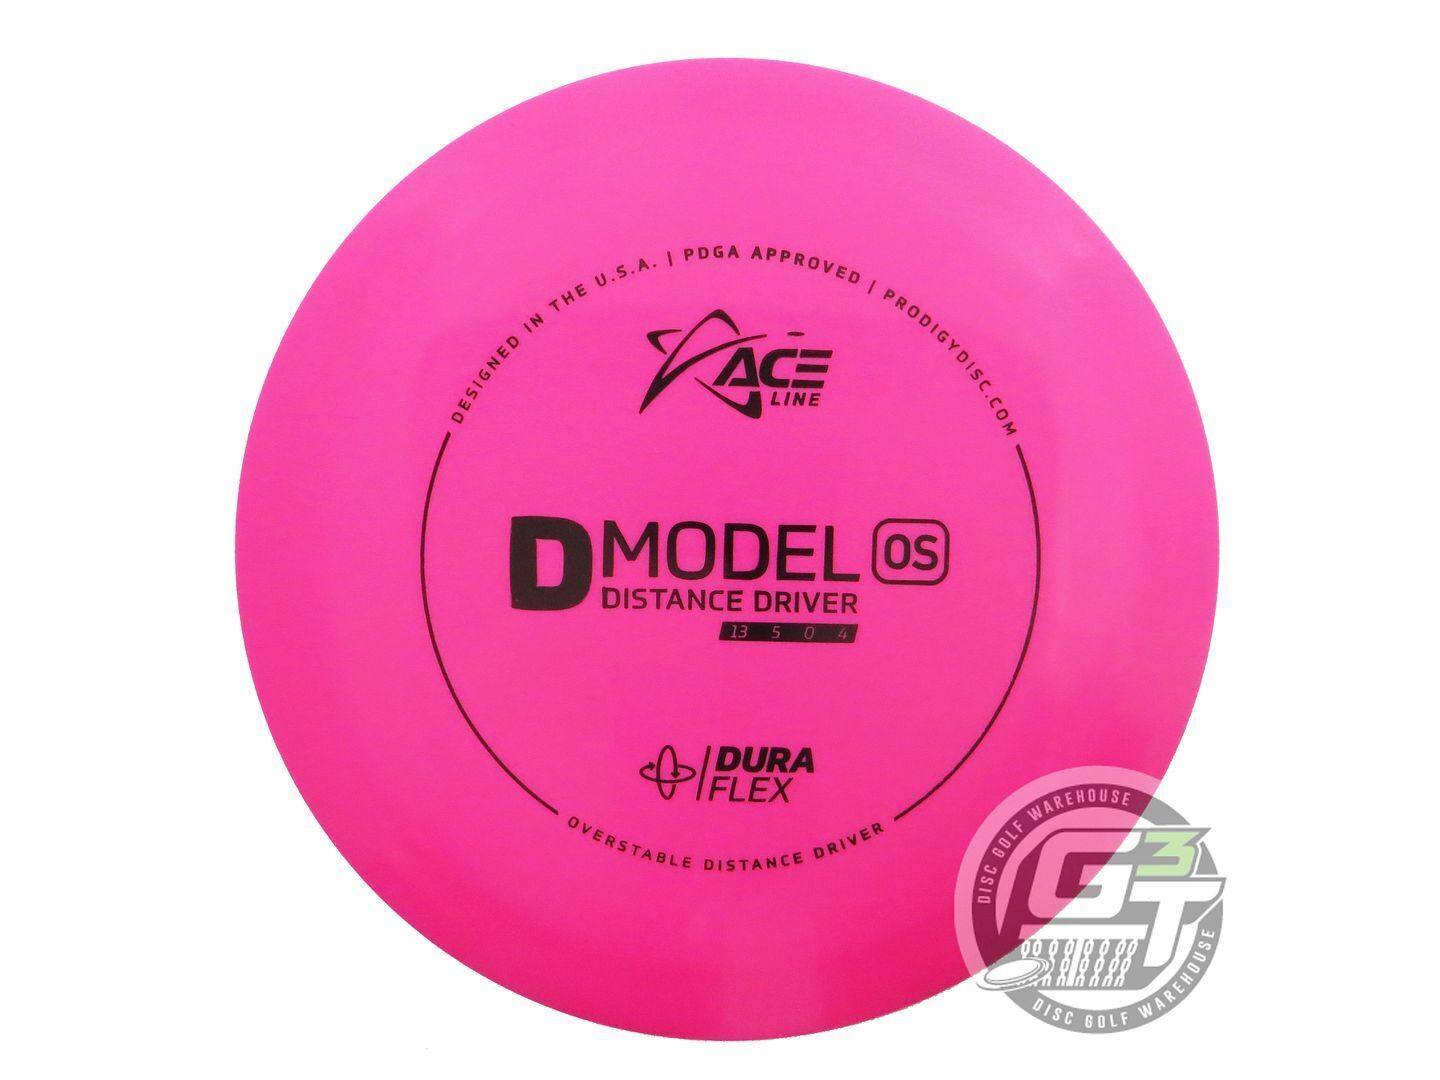 Prodigy Ace Line DuraFlex D Model OS Distance Driver Golf Disc (Individually Listed)